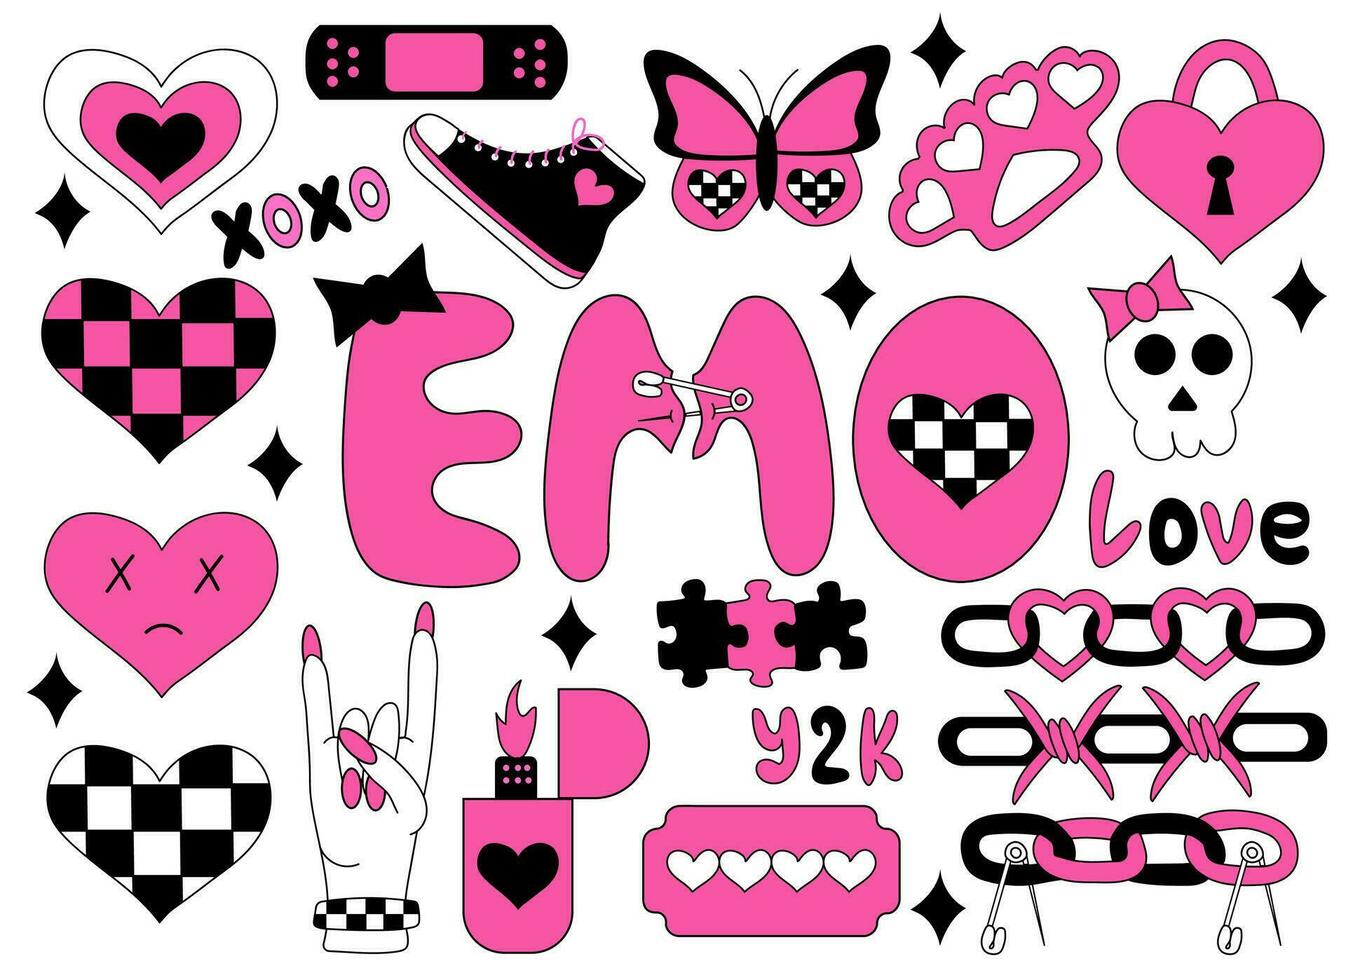 Set of emo elements. Y2k style. Hearts in chessboard, blade, Emo lettering, chains, costet, rock sign, sneakers, butterfly, skull, lighter. Black and pink. Vector flat illustration.